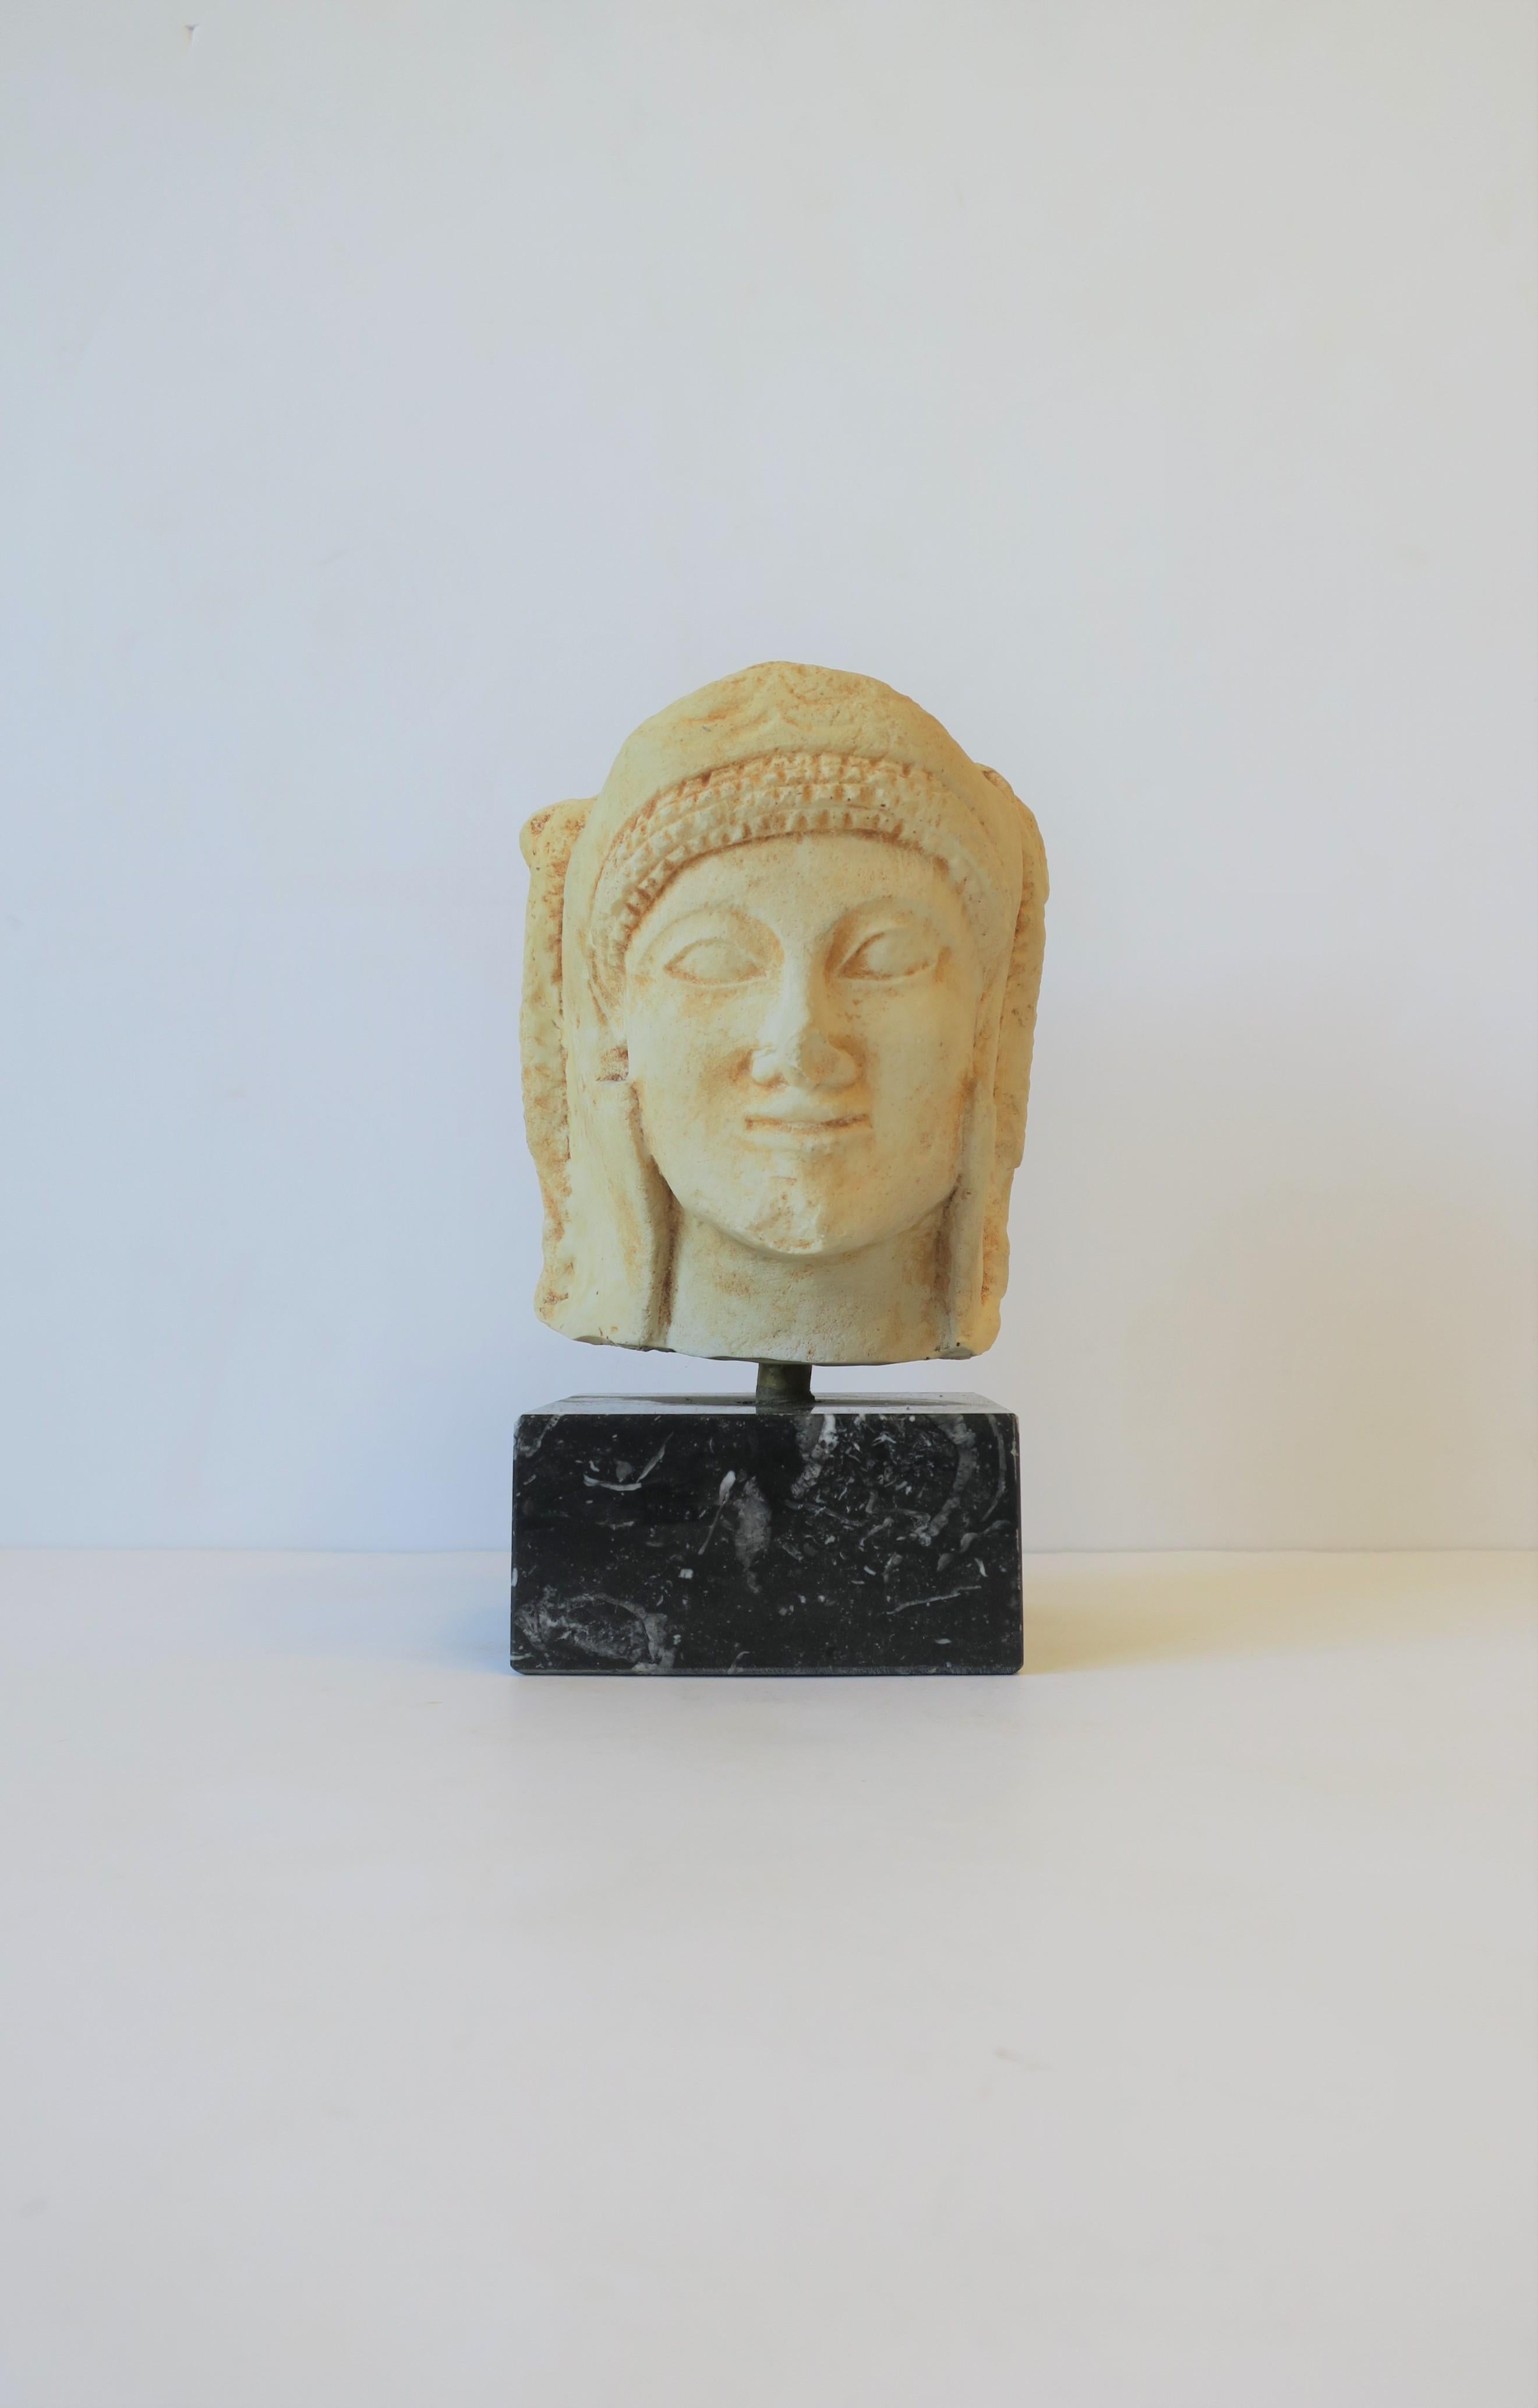 A substantial head/bust sculpture piece; a reproduction of the prehistoric Ancient Greek and Roman art period, circa 20th century, Greece. Piece is a matte resin (feels like stone) attached on a black and white marble base. 

Piece measures:
Overall